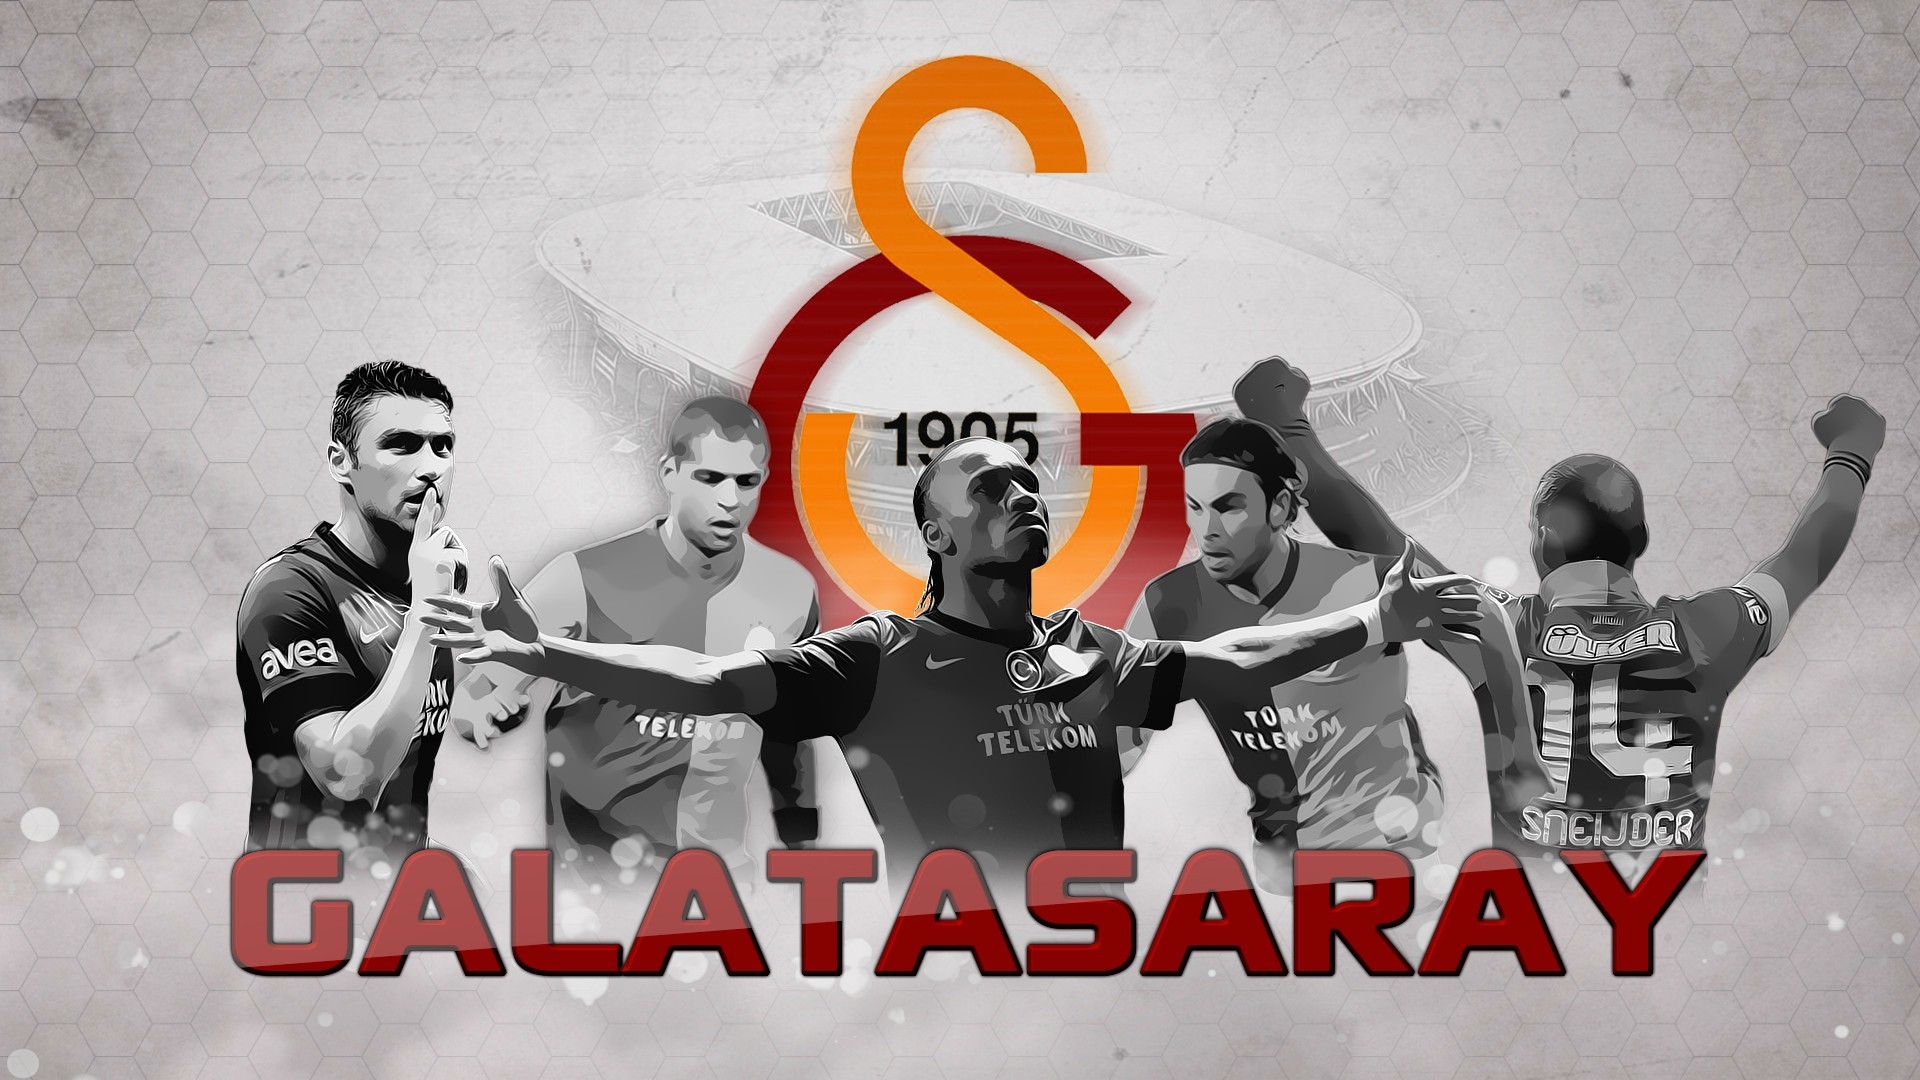 Galatasaray S.K., Soccer Clubs, Didier Drogba Wallpaper HD / Desktop and Mobile Background